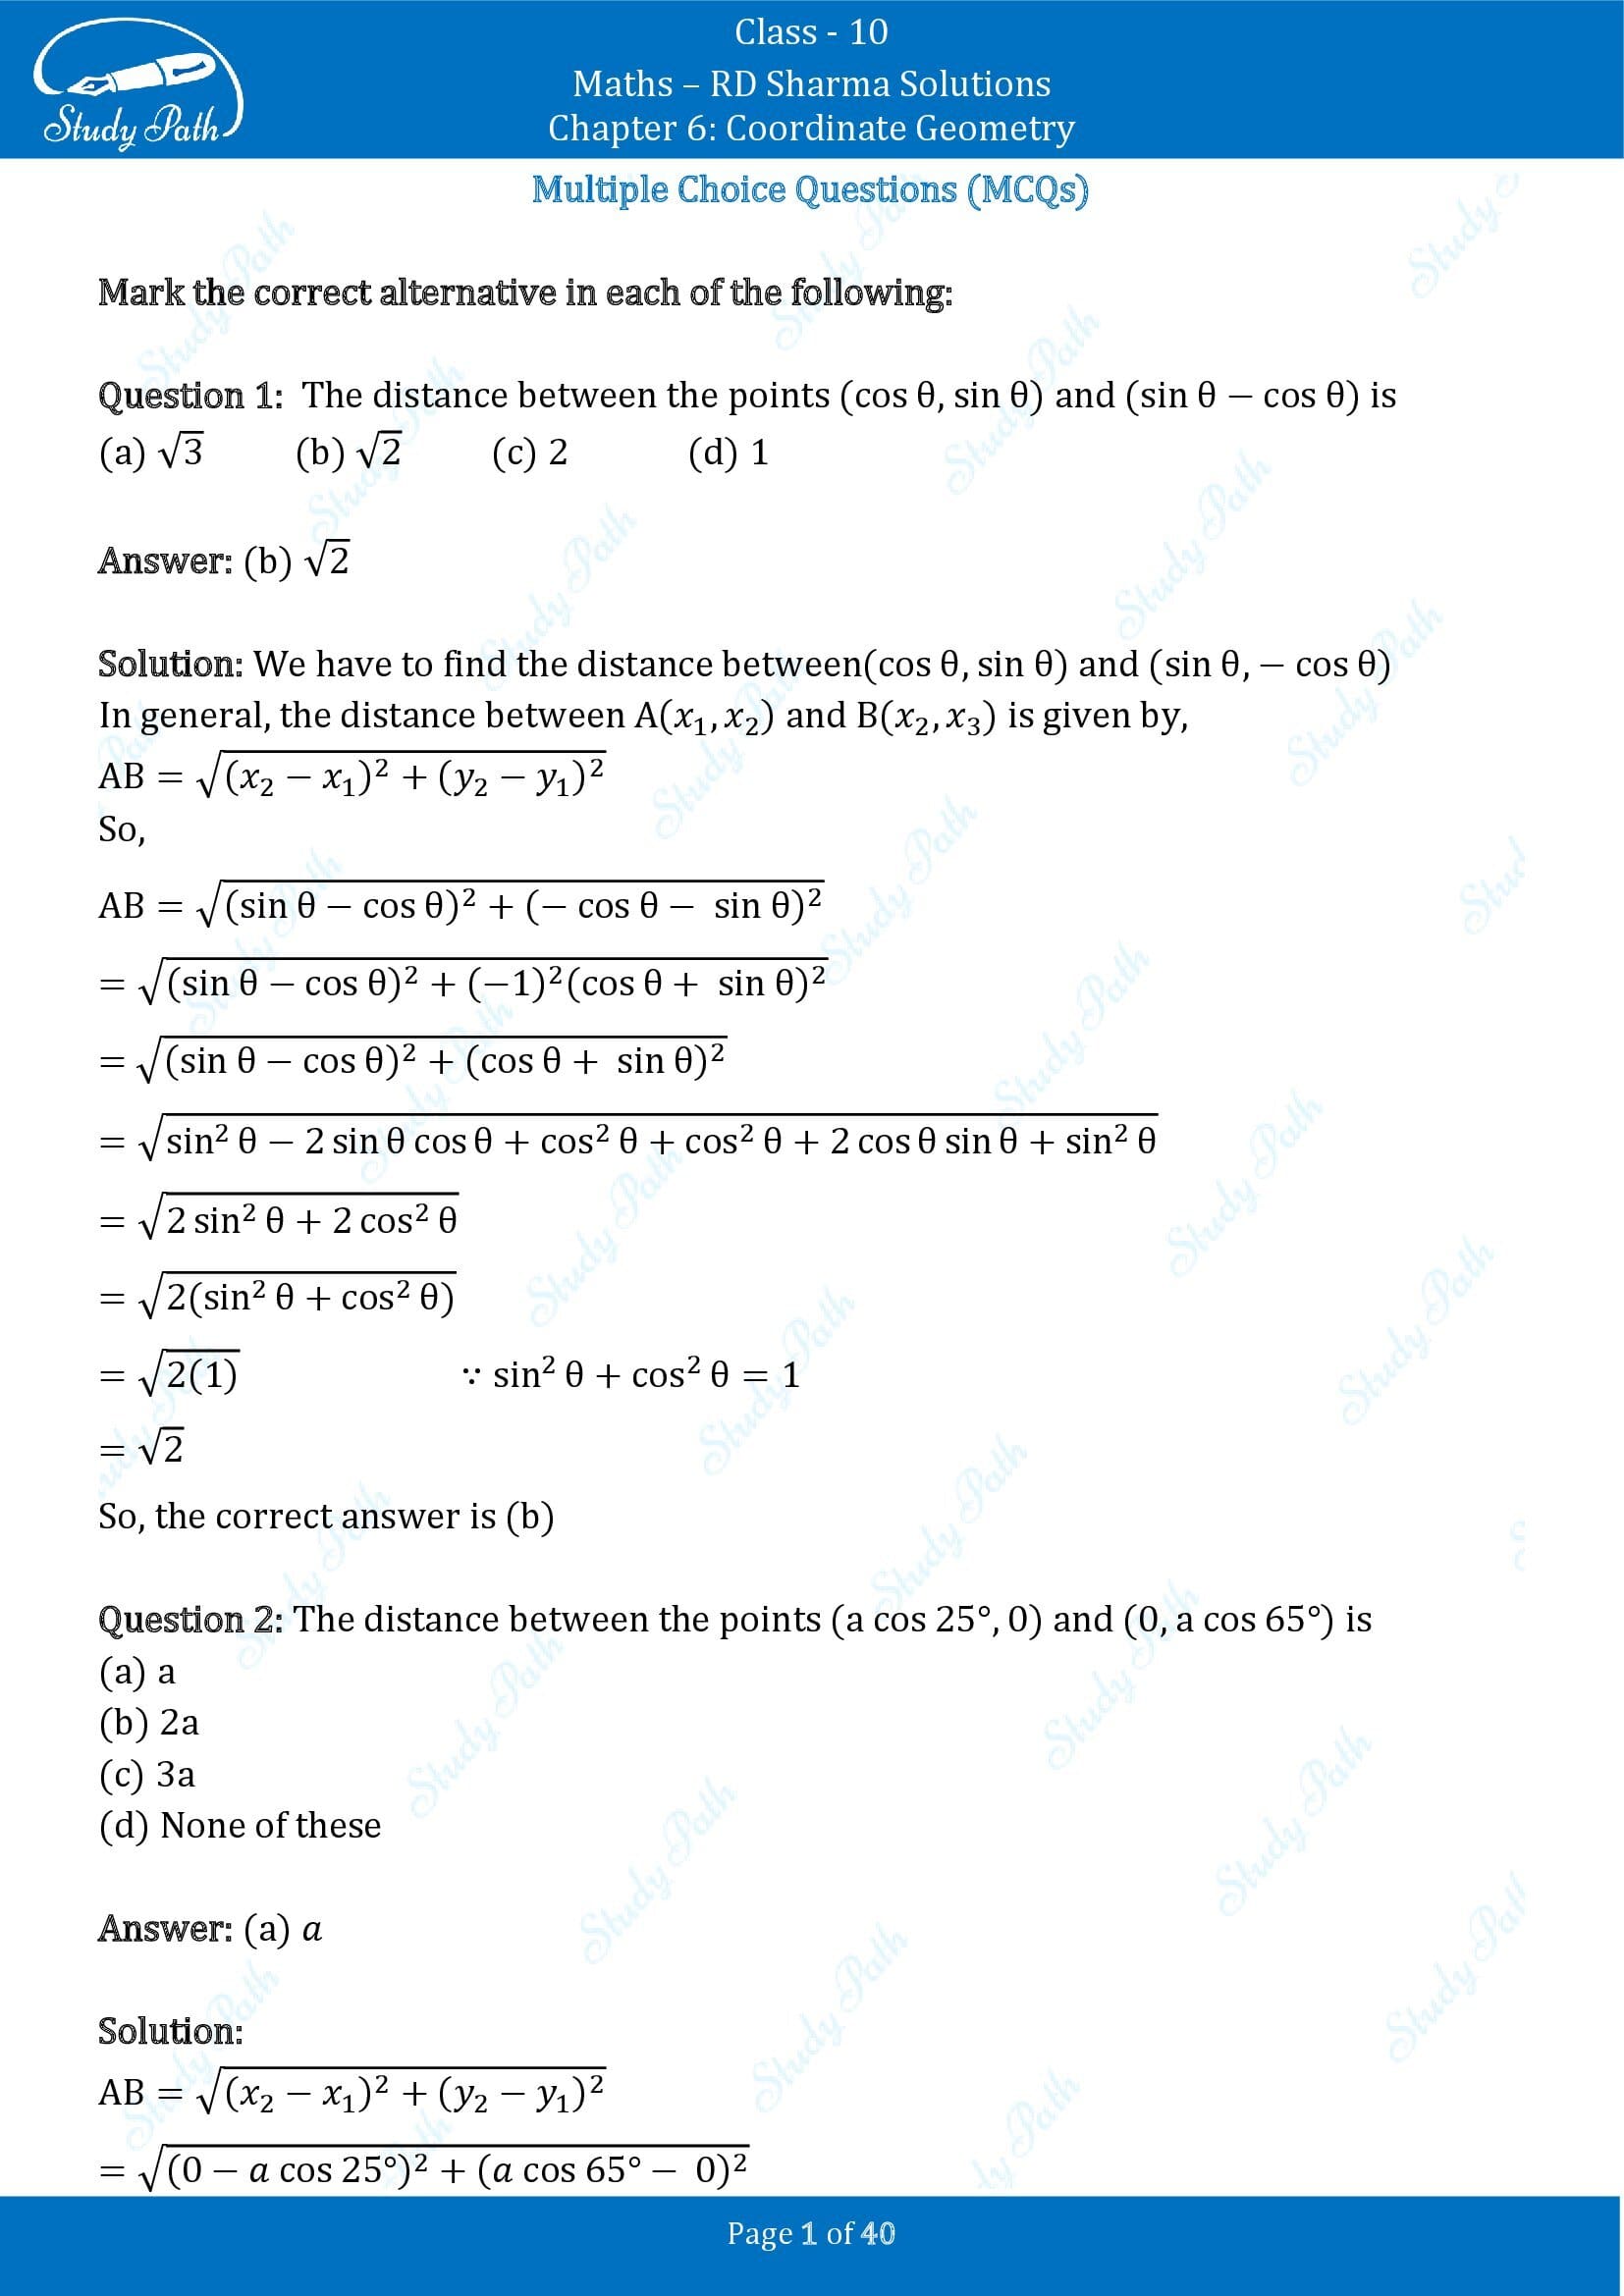 RD Sharma Solutions Class 10 Chapter 6 Coordinate Geometry Multiple Choice Question MCQs 00001